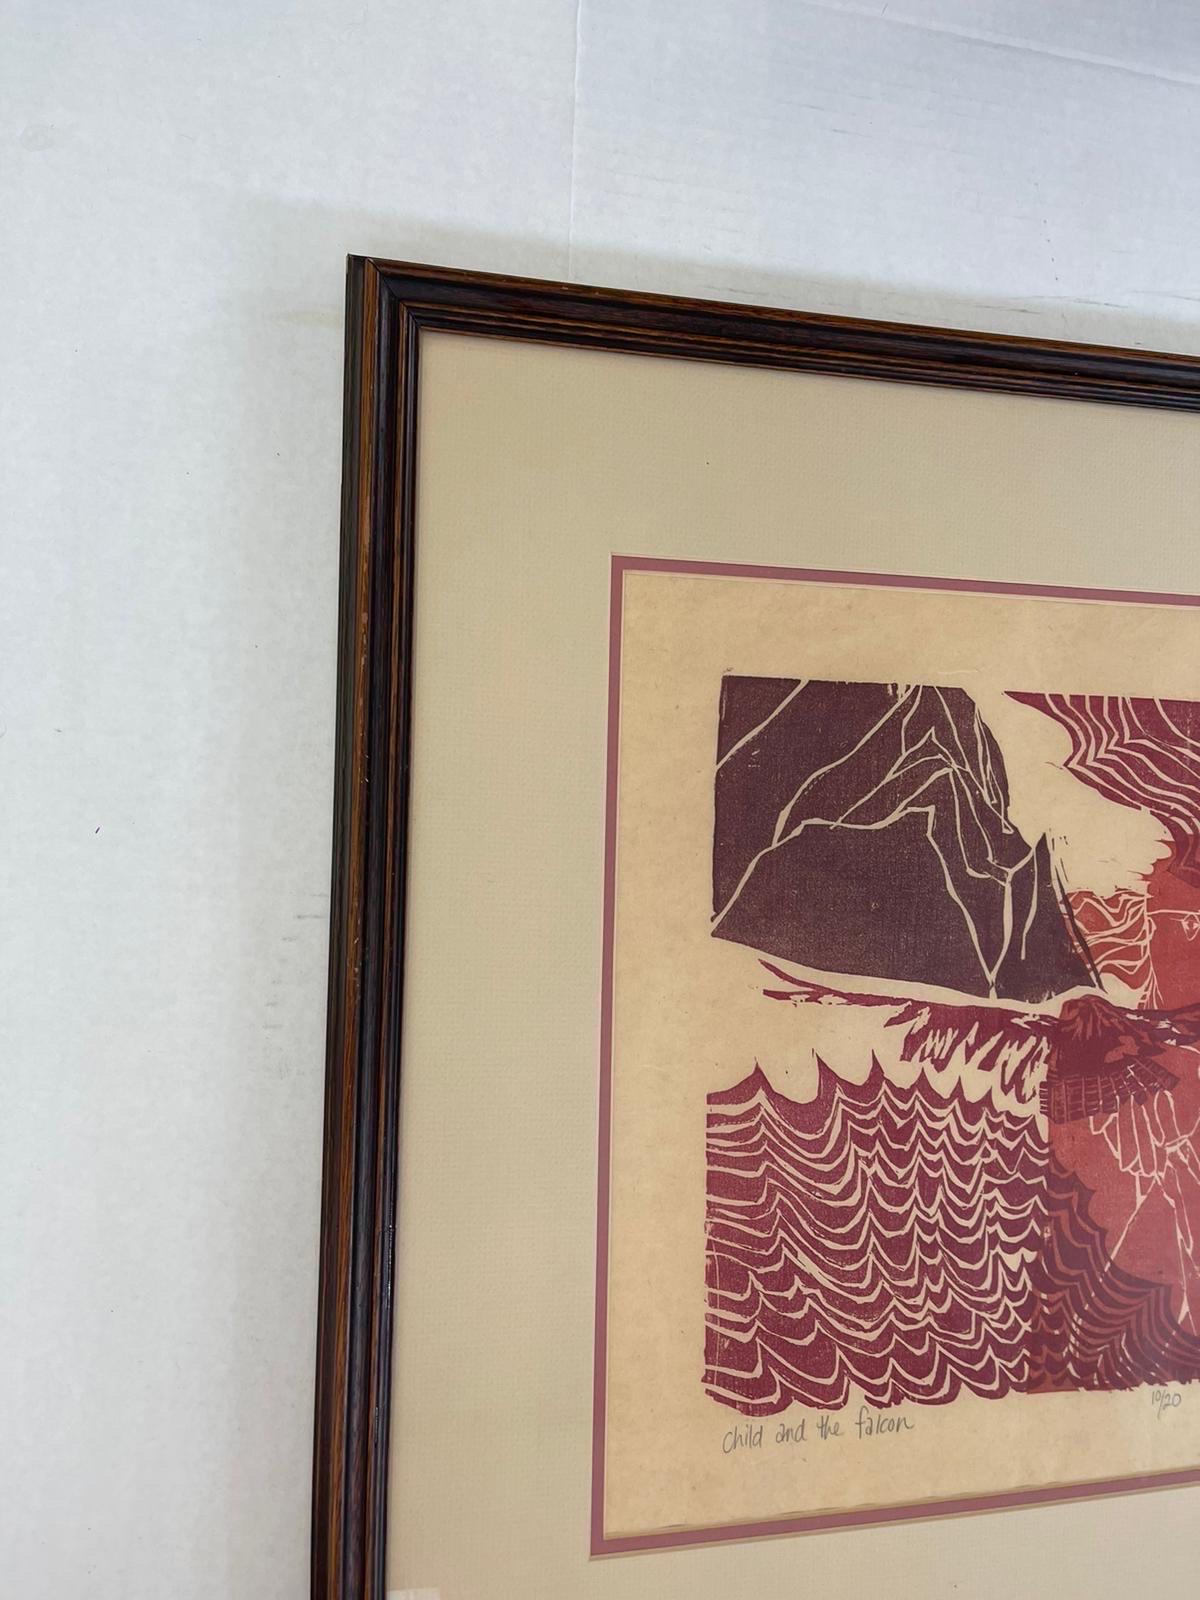 Vintage Framed Original Wood Cut Artwork “ the Child and the Falcon “ by Kate In Good Condition For Sale In Seattle, WA